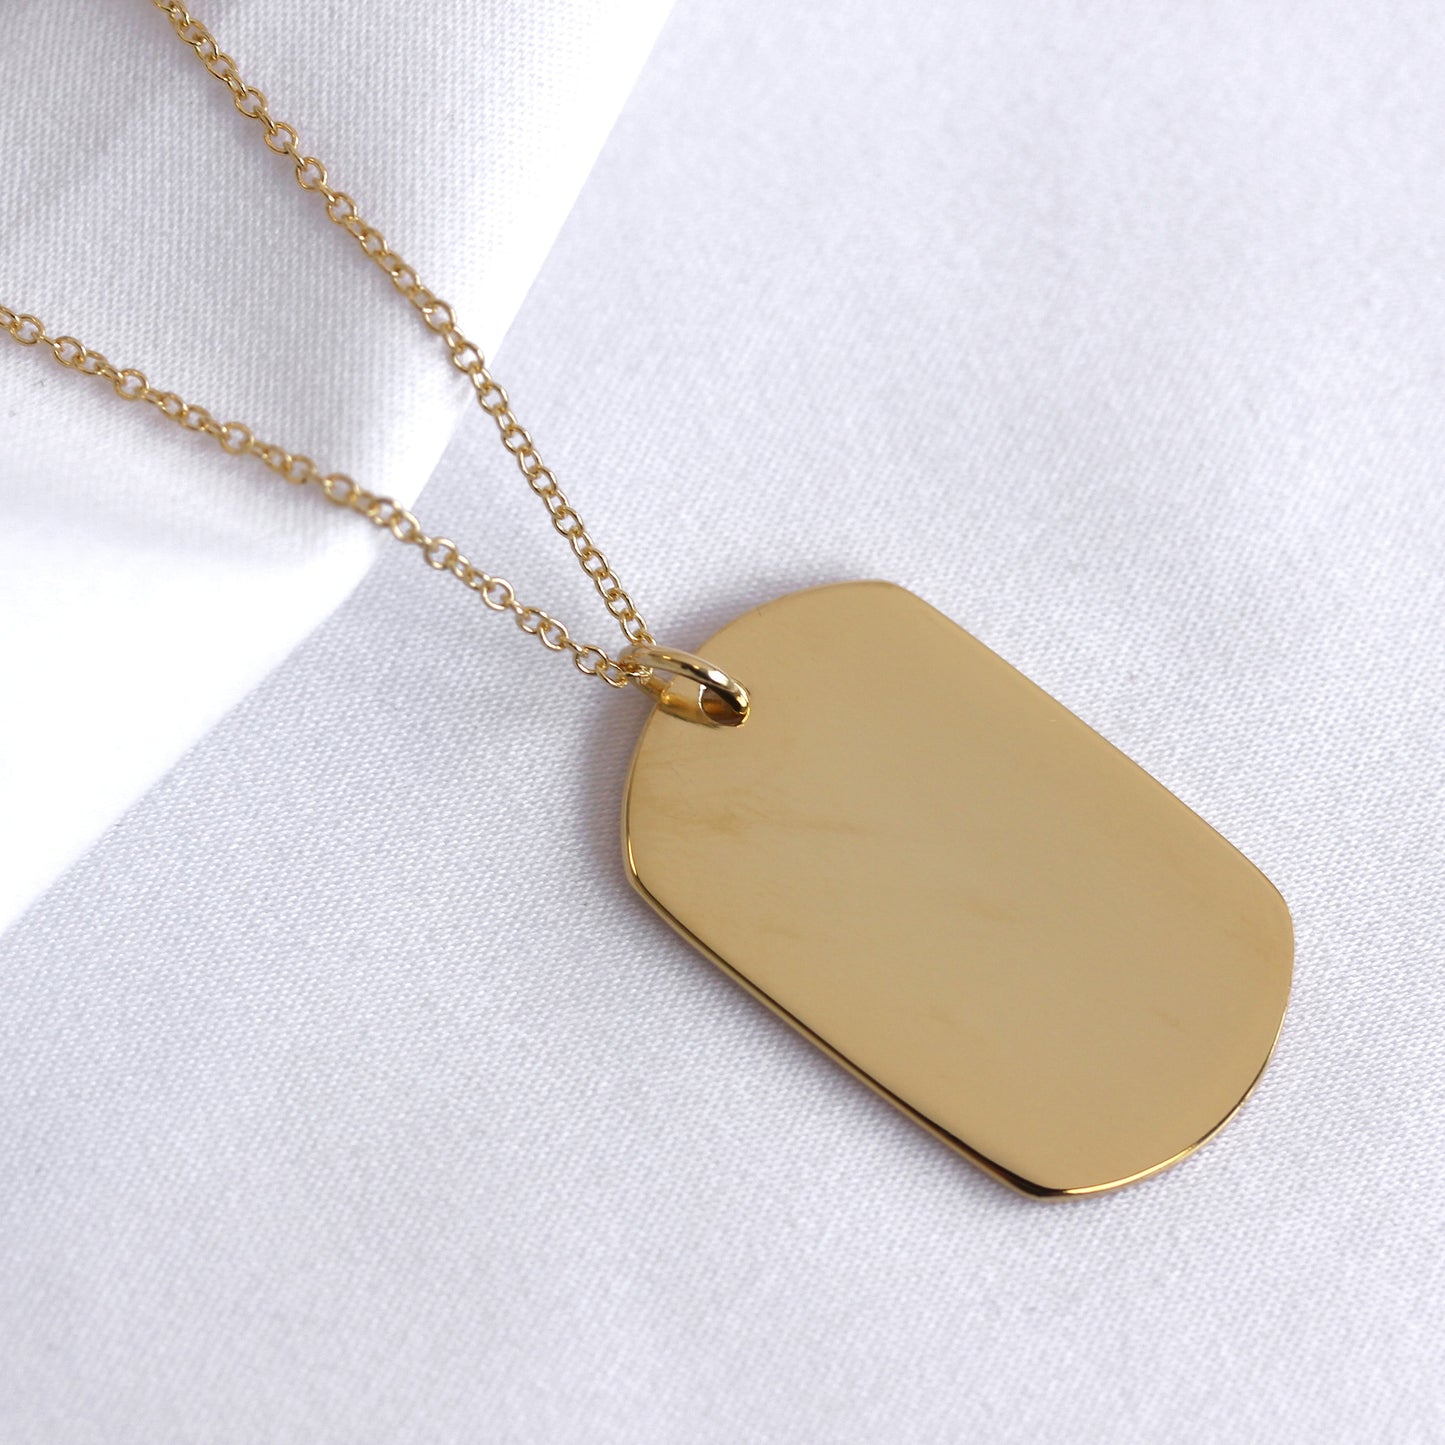 Large Gold Plated Sterling Silver Dog Tag Necklace 16 - 24 Inches